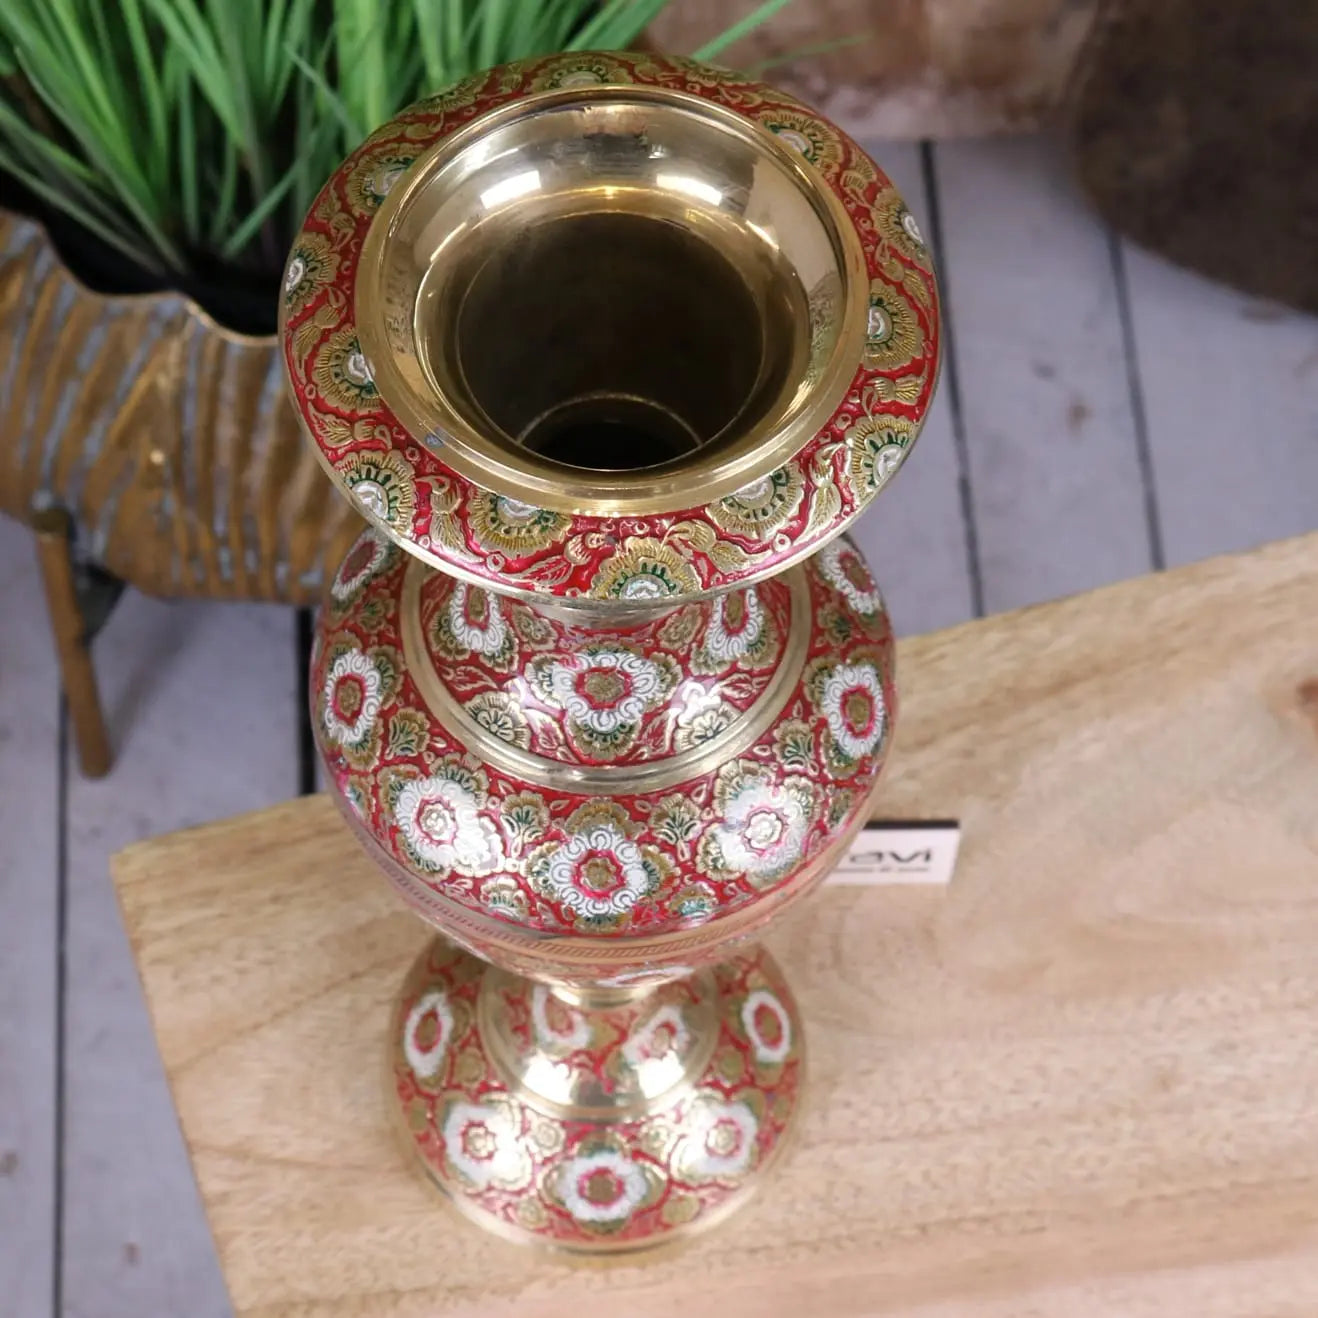 Vintage 36cm Brass Vase Hand Painted and Etched – Maravi